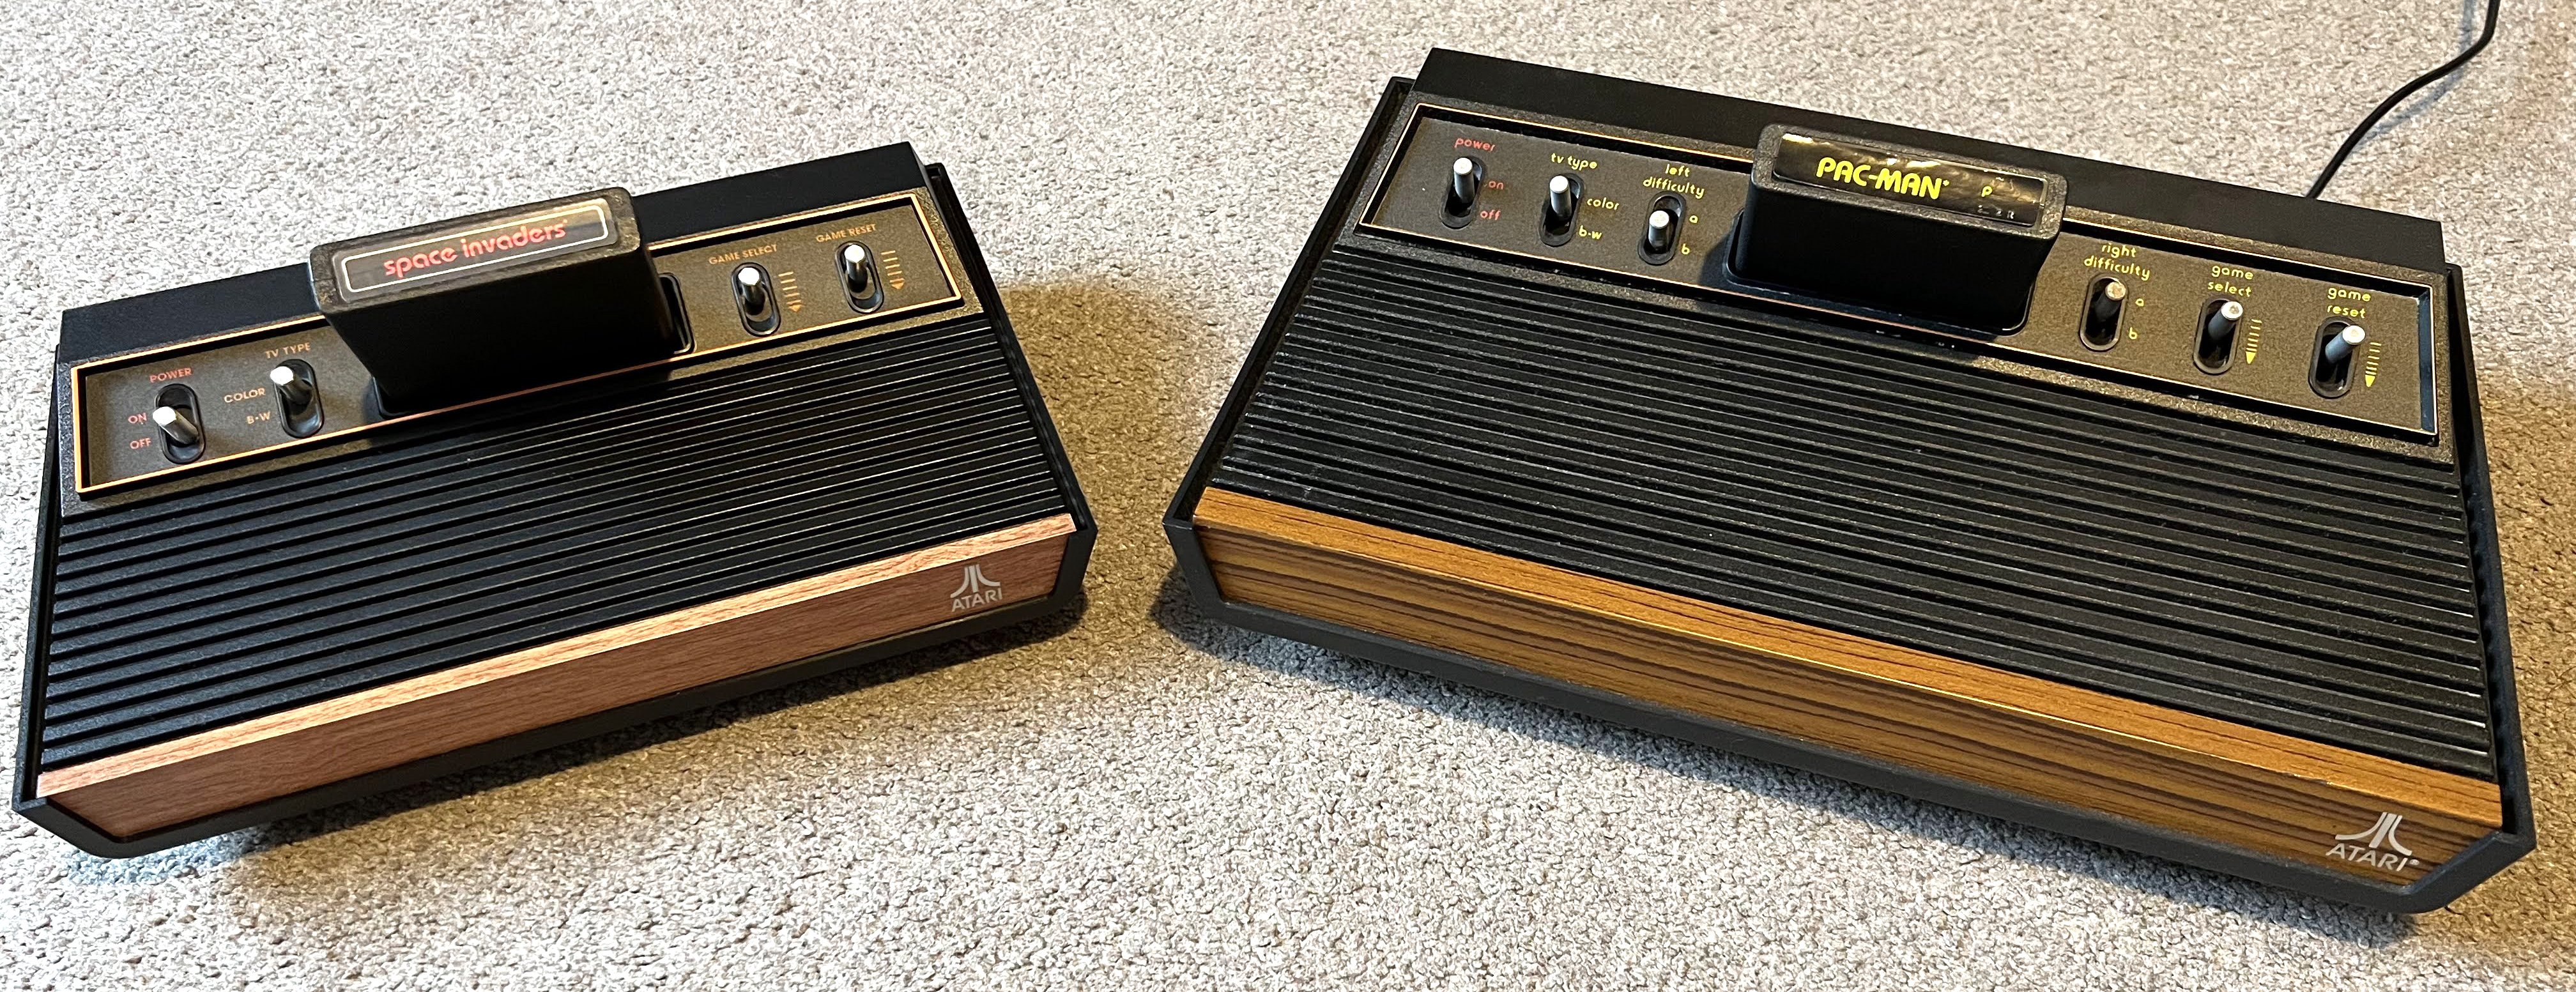 The Atari 2600+ Will Play Your Old Cartridges on Your Modern TV